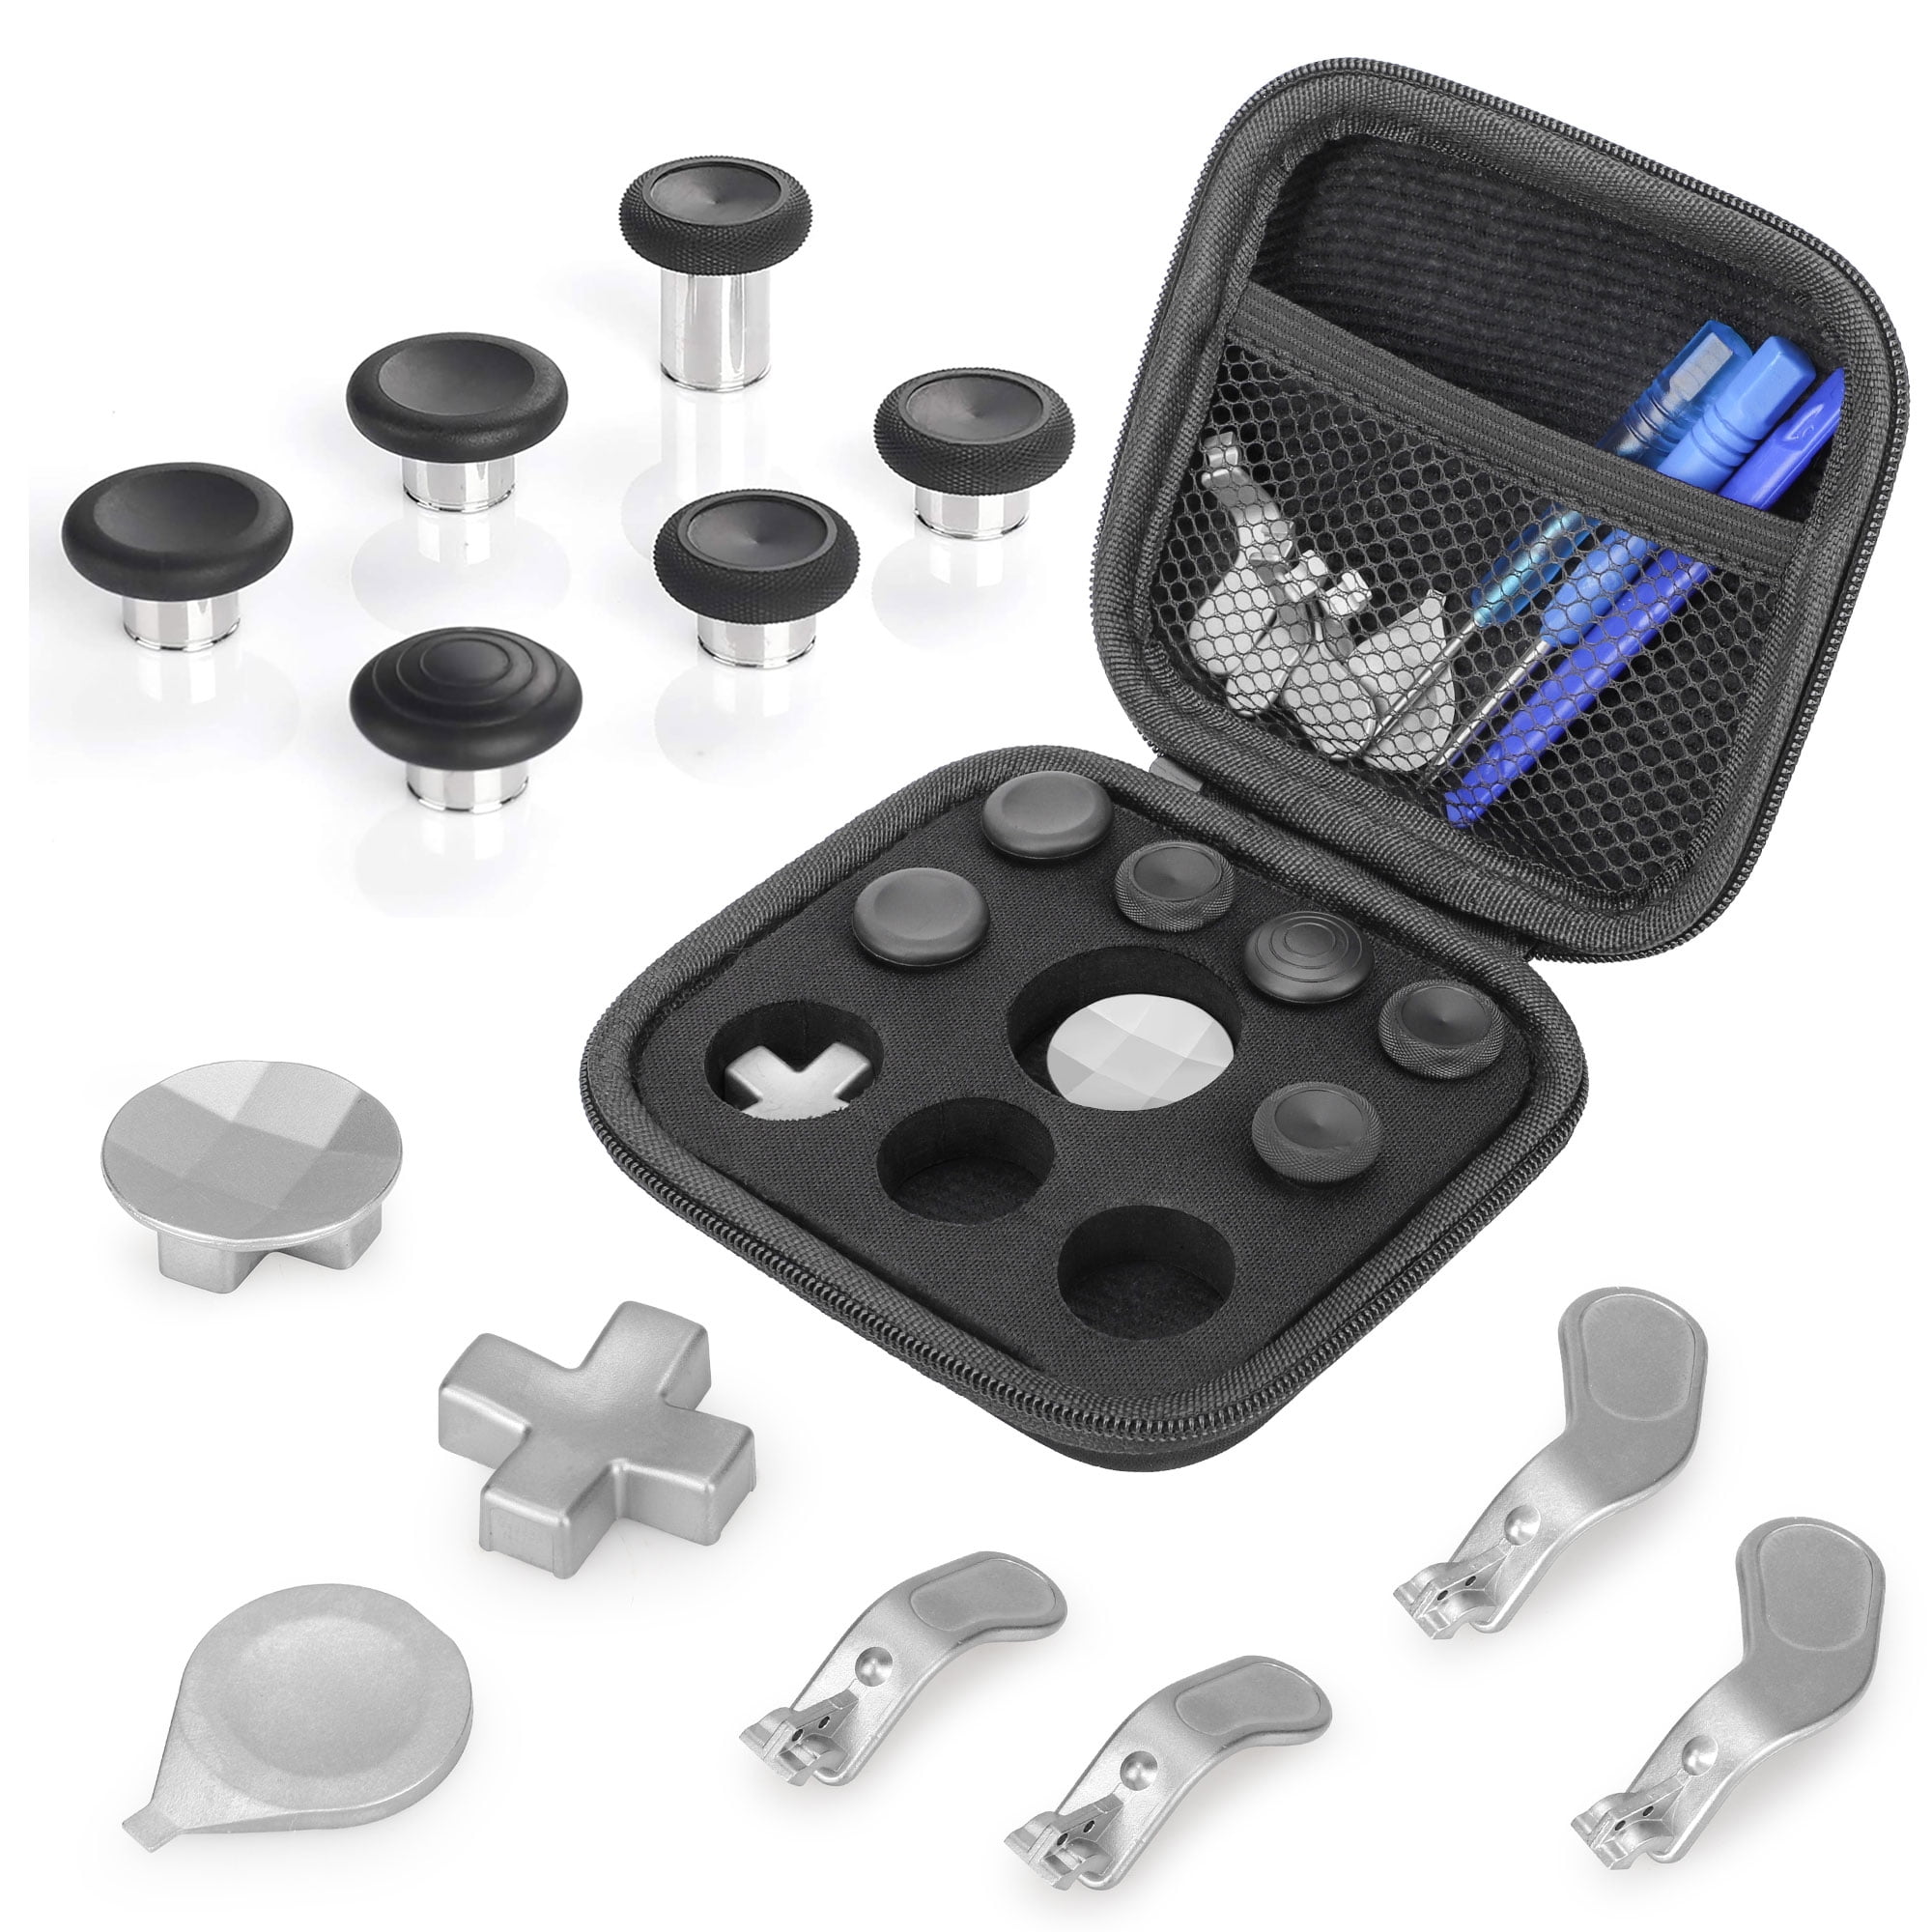 Elite Series 2 Controller Replacement Part Custom Accessory Kit